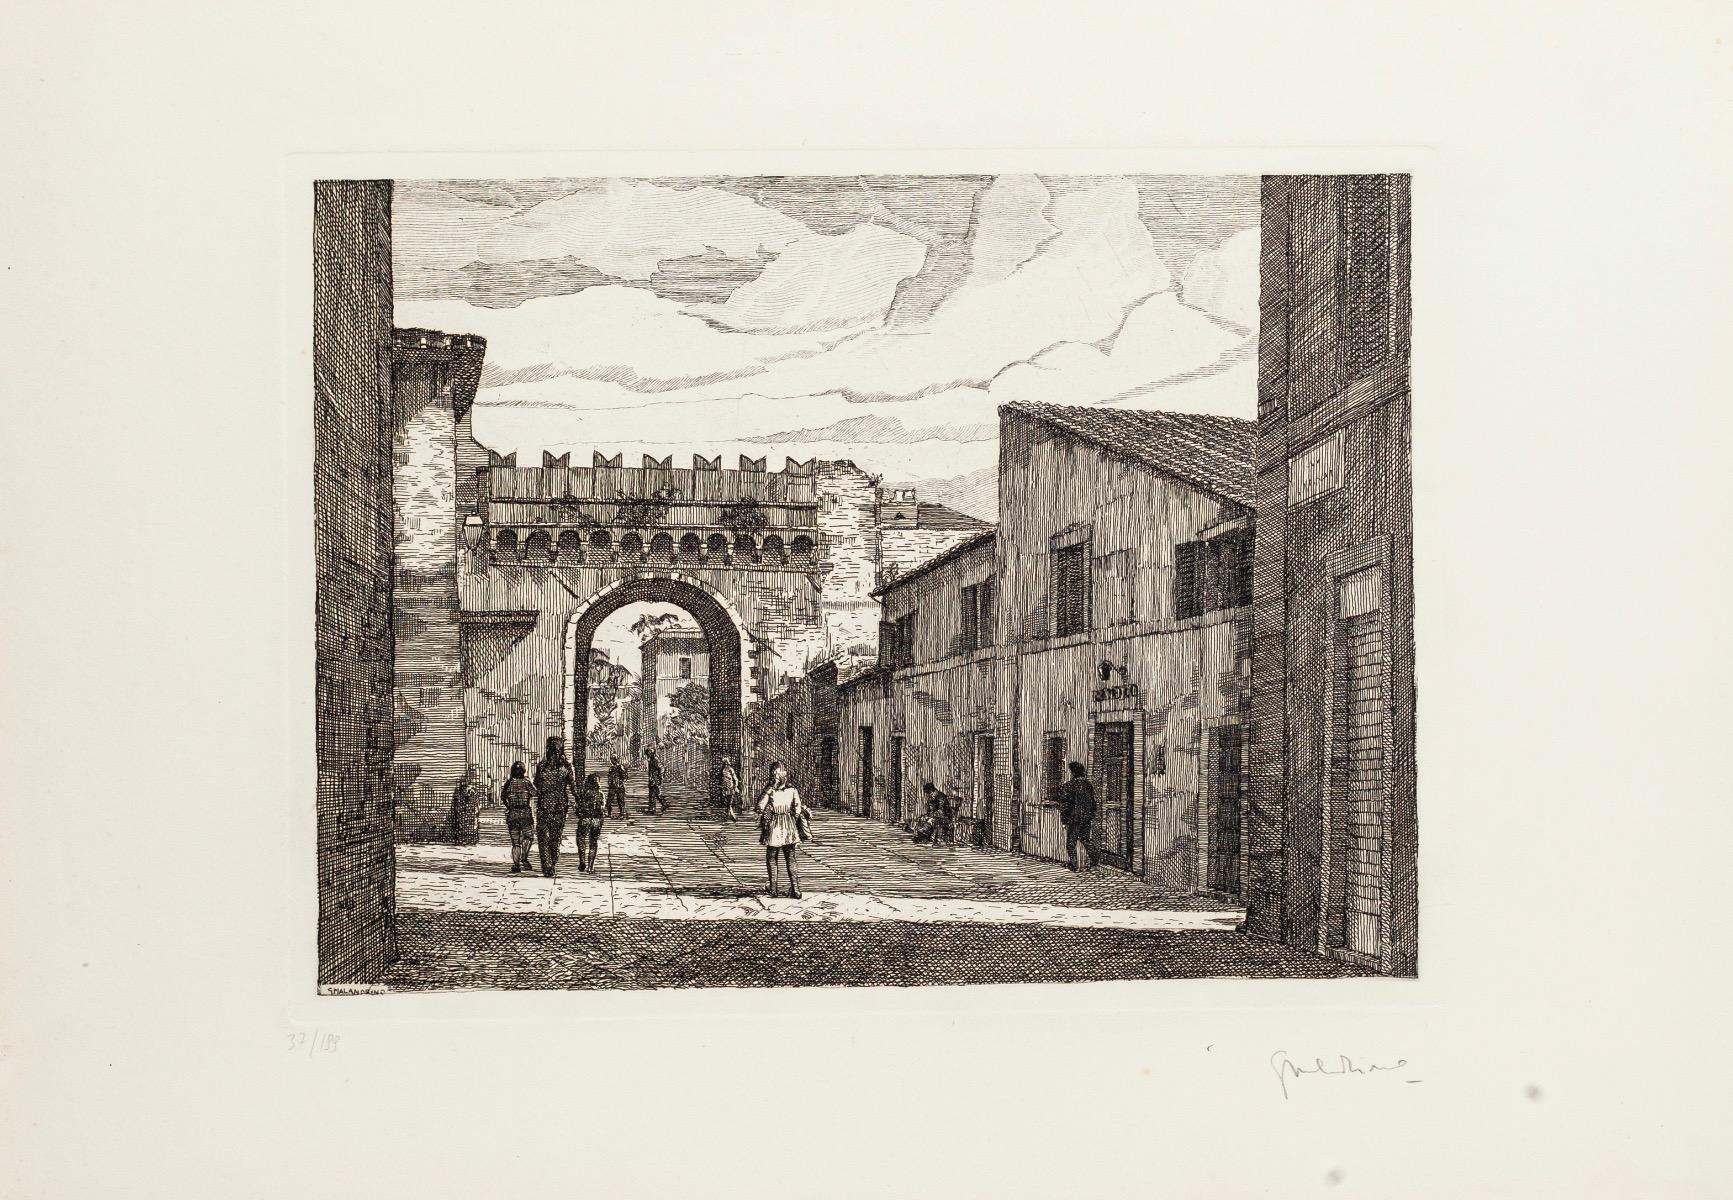 Rome - Porta Settimiana is an original etching artwork realized by the Italian artist Giuseppe Malandrino.

Hand-signed by the artist on the lower right in pencil.

Numbered in Roman numerals, edition 37/199  prints.

Perfect conditions. 

Giuseppe